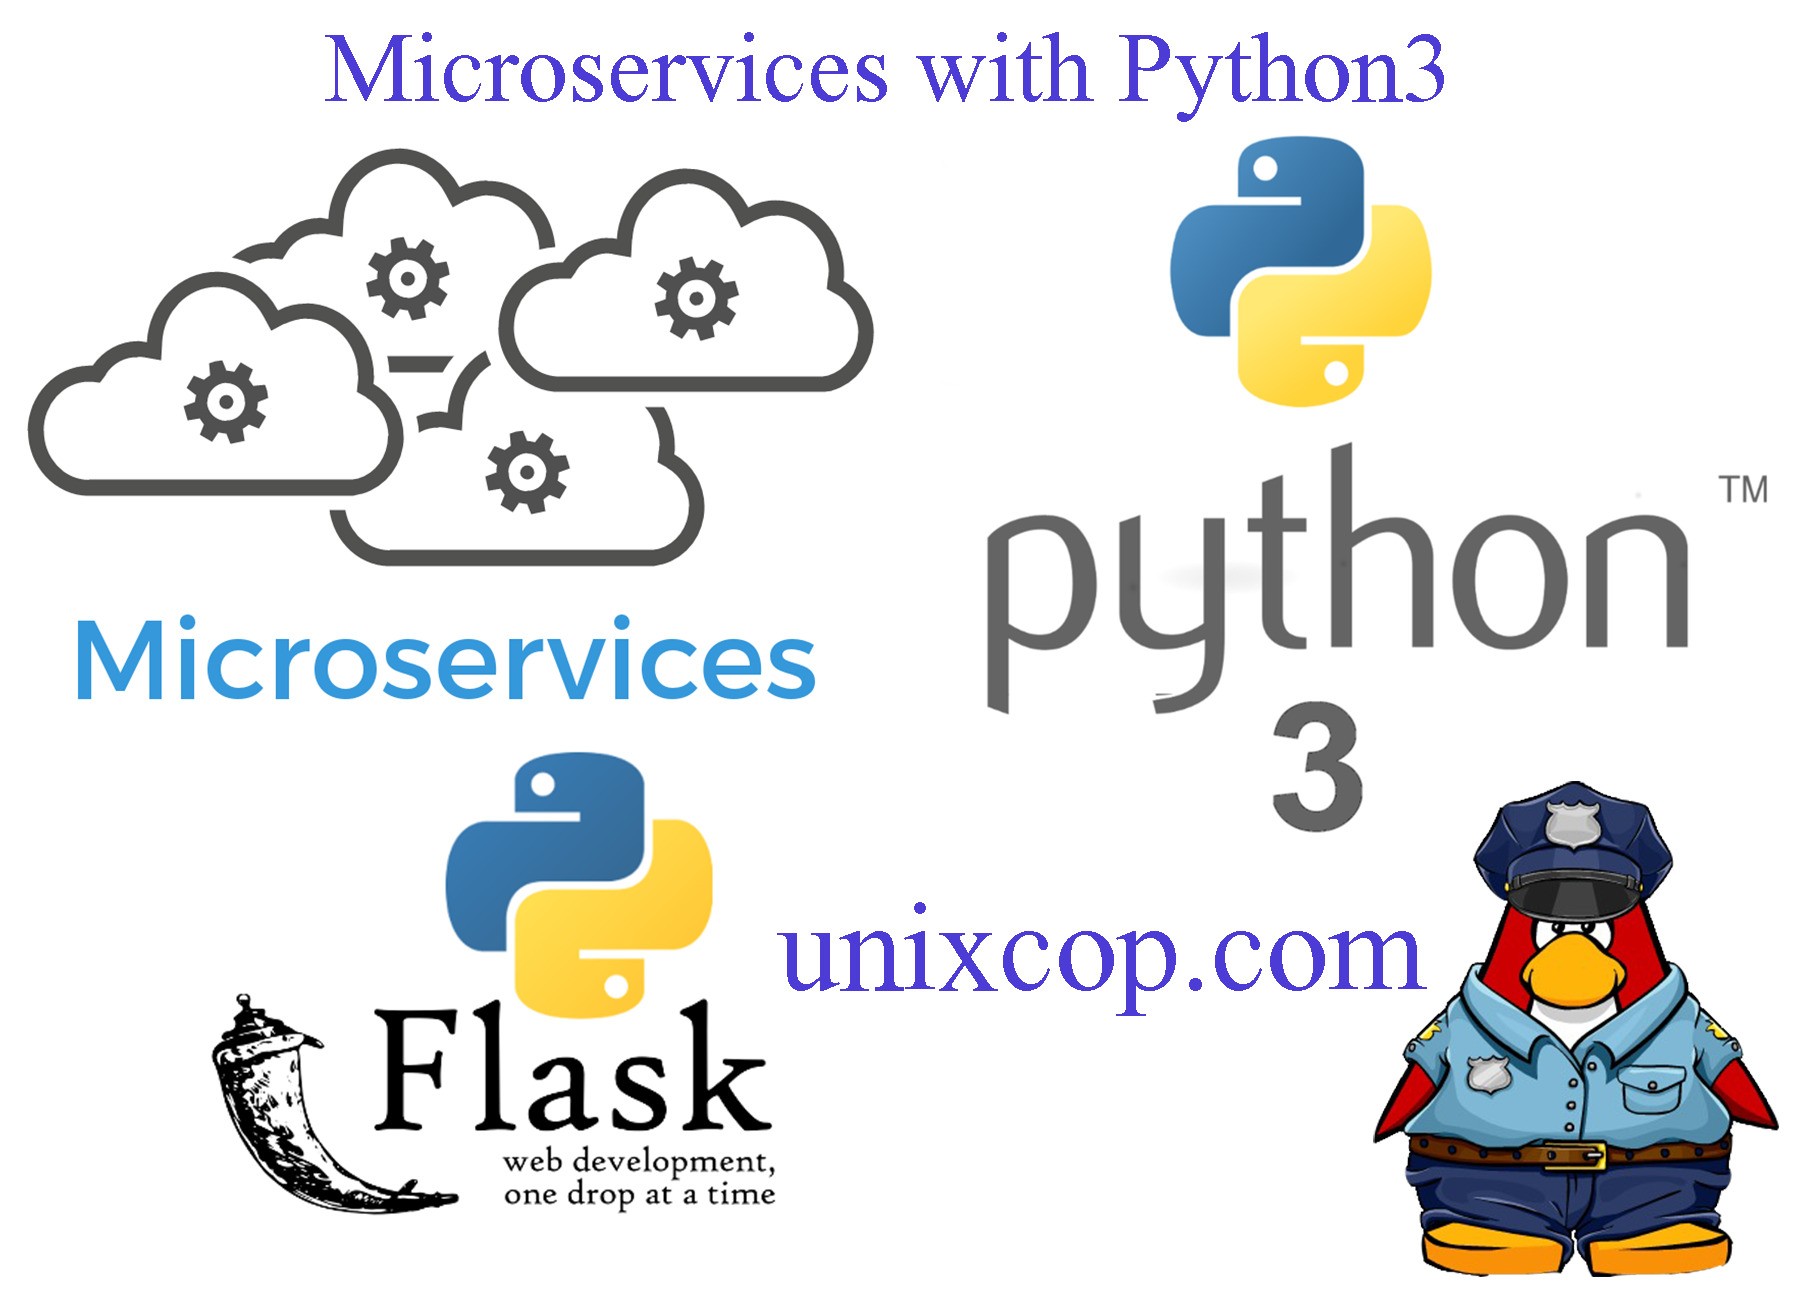 Microservices with Python3